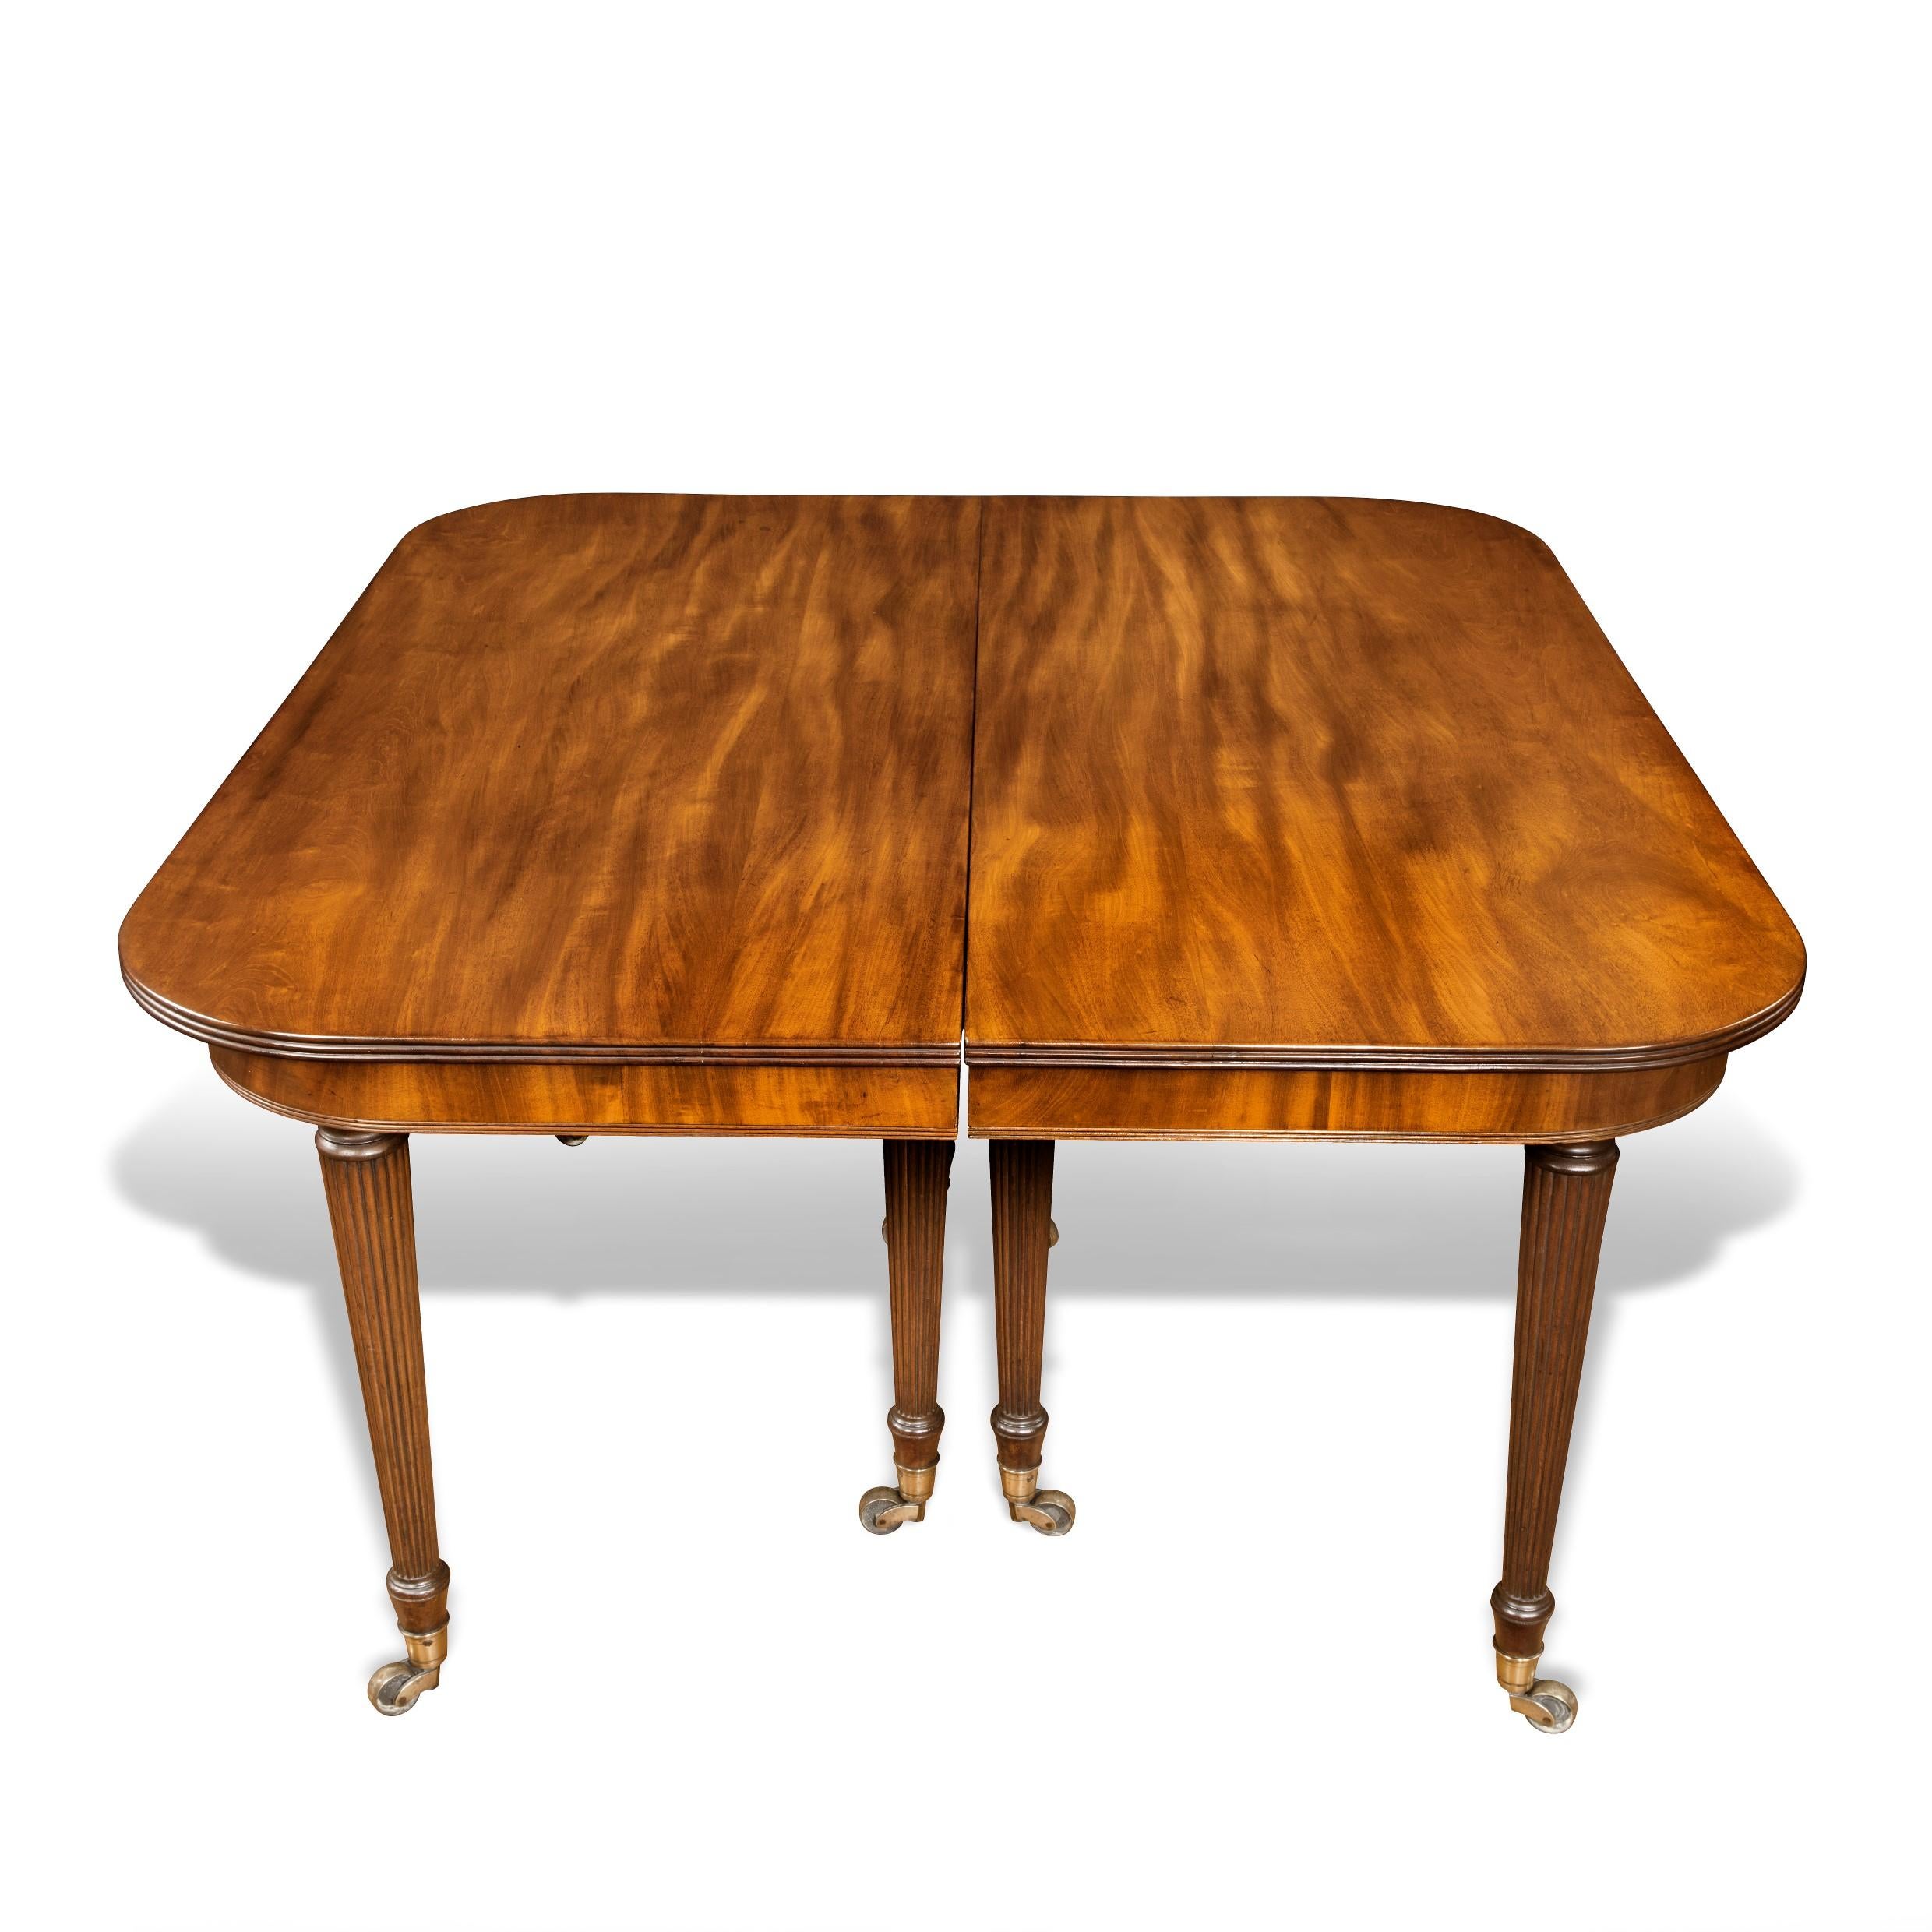 Early 19th Century ‘imperial’ Action Mahogany Extending Dining Table Attributed to Gillows